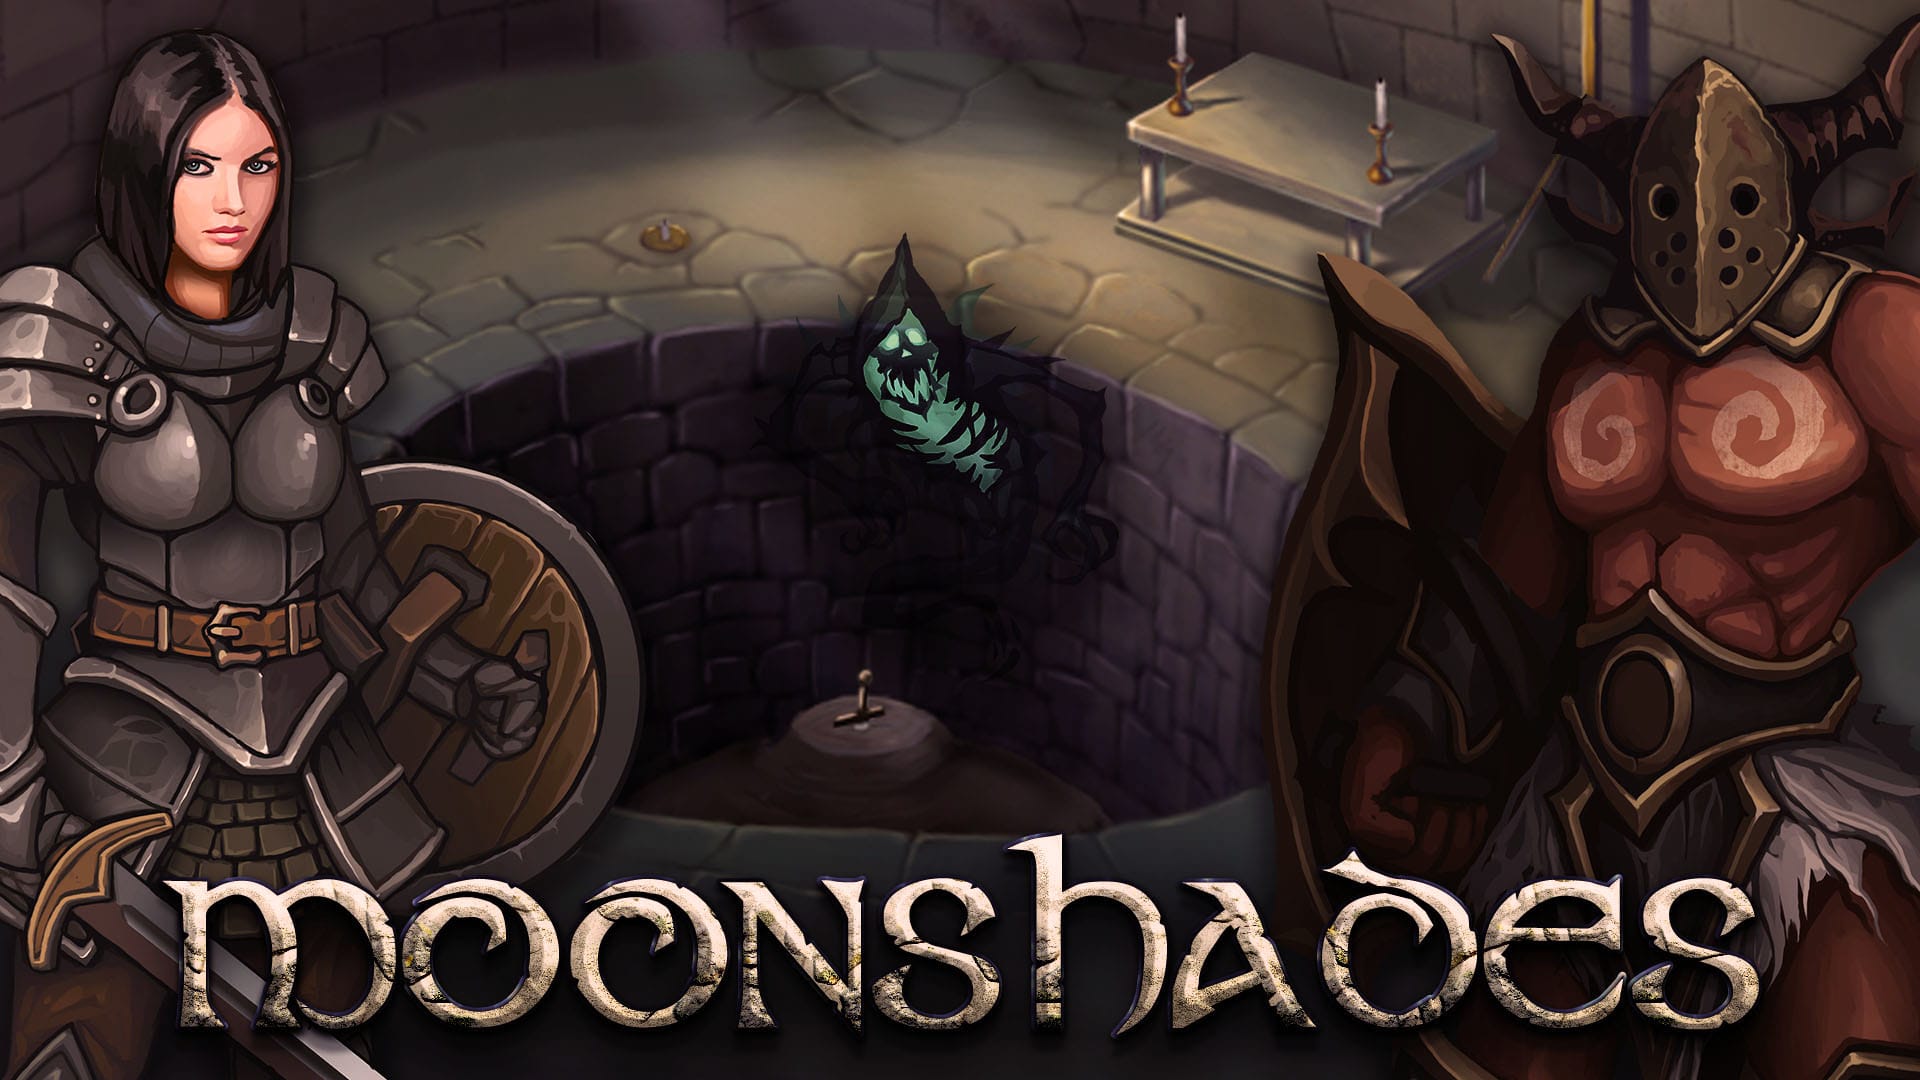 Moonshades: a classic dungeon crawler RPG